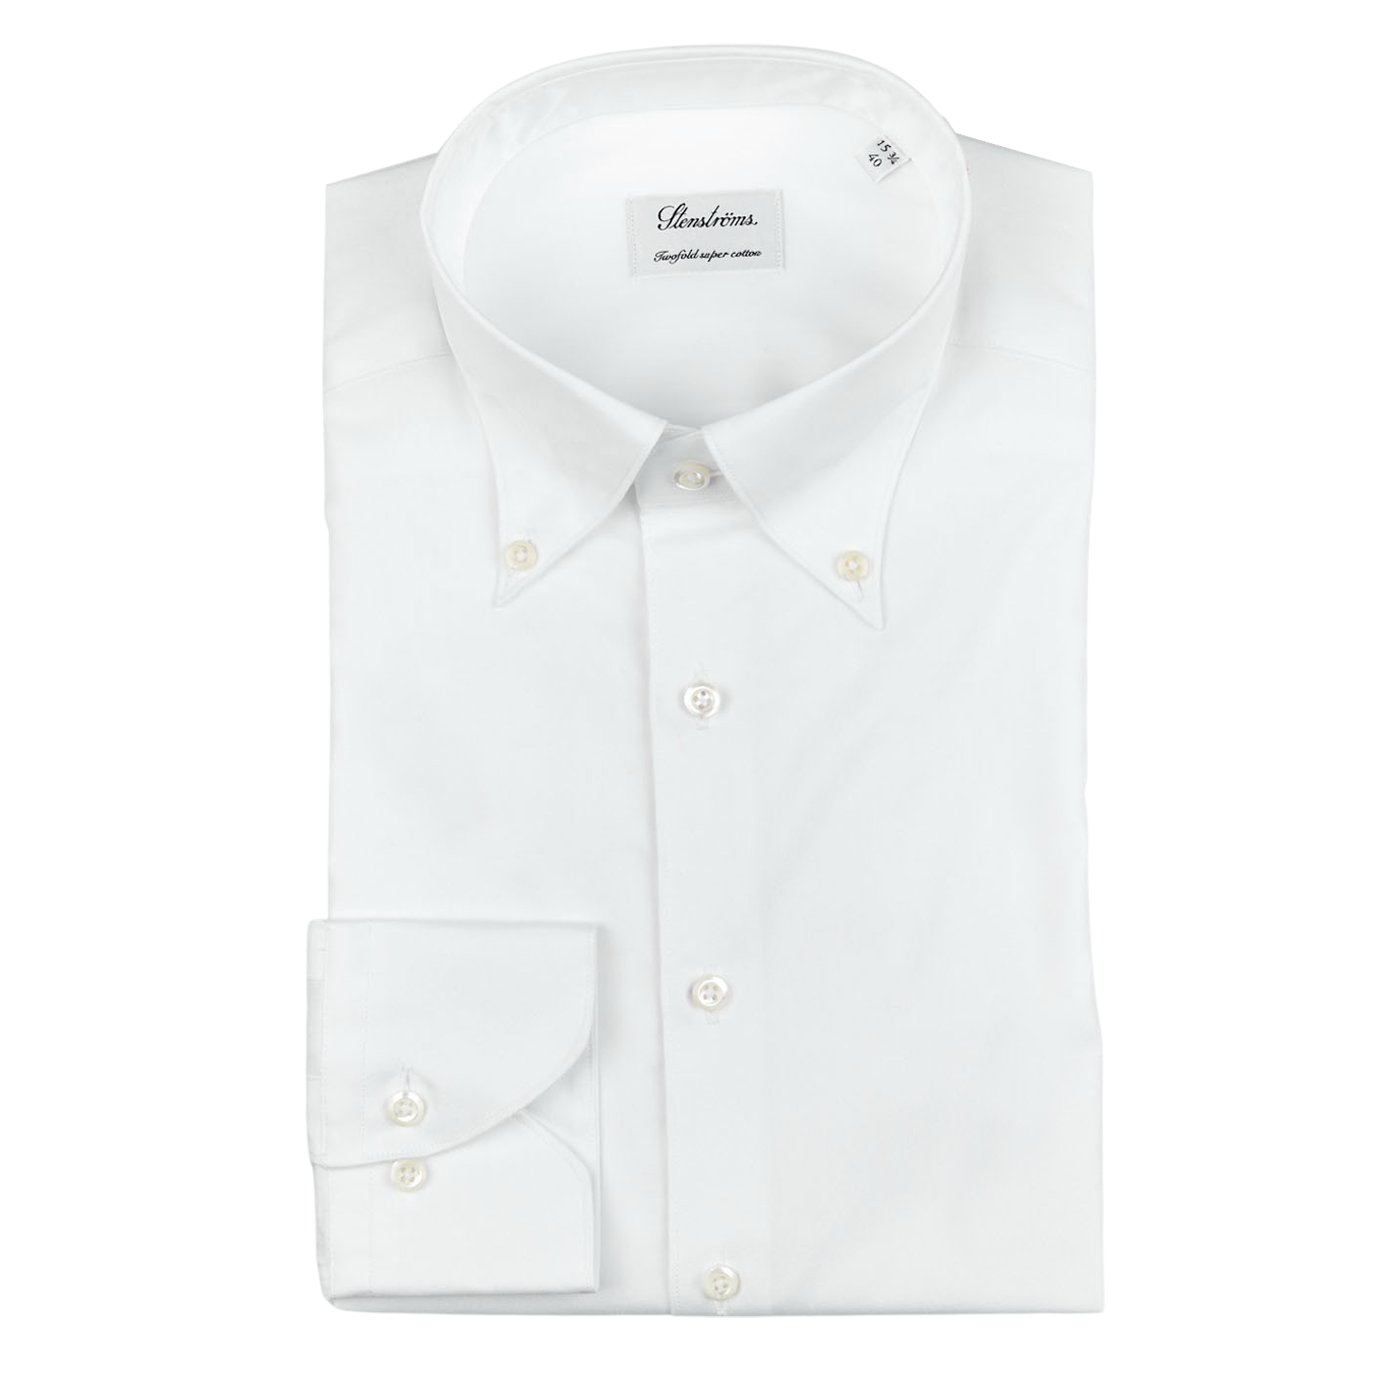 A Stenströms White Cotton Oxford Fitted Body BD Shirt on a white background.